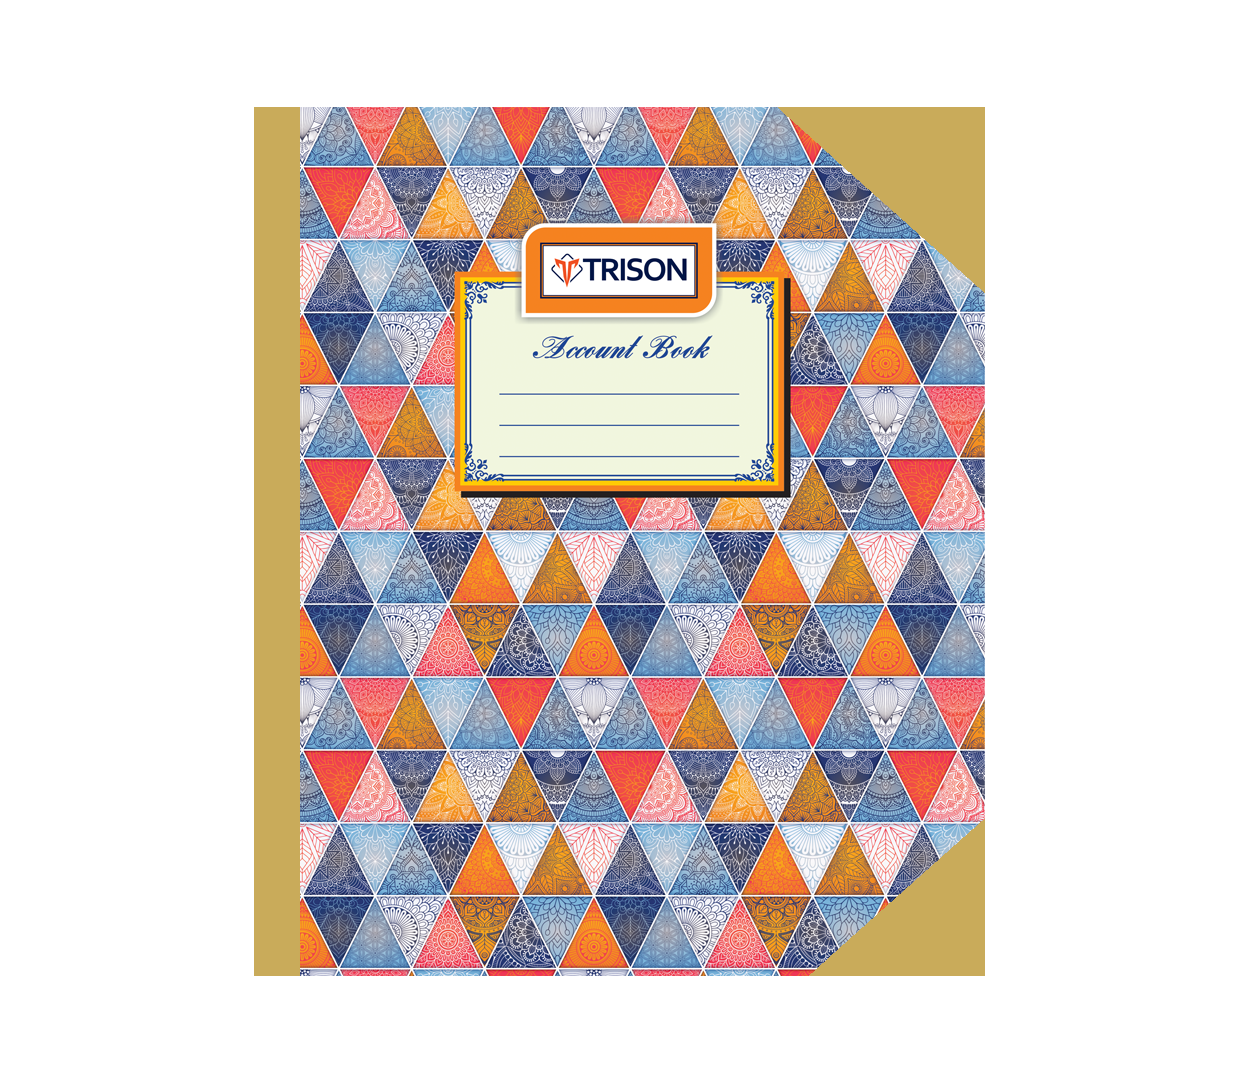 Trison Cash Book (Copy Size) | Premium quality | Available in White Binding (L/B) & Ordinary Binding (O/B) | 65 GSM | Green ledger paper | Size: 15x19 cm | Superior cloth hardbound | Gloss laminated printed cover | Available in No./Pages: 1/128, 2/256, 3/432 & 4/576 | Comes with Index page | Also known as Kona pusta binding | cashbook | cash copy | cash book | ca